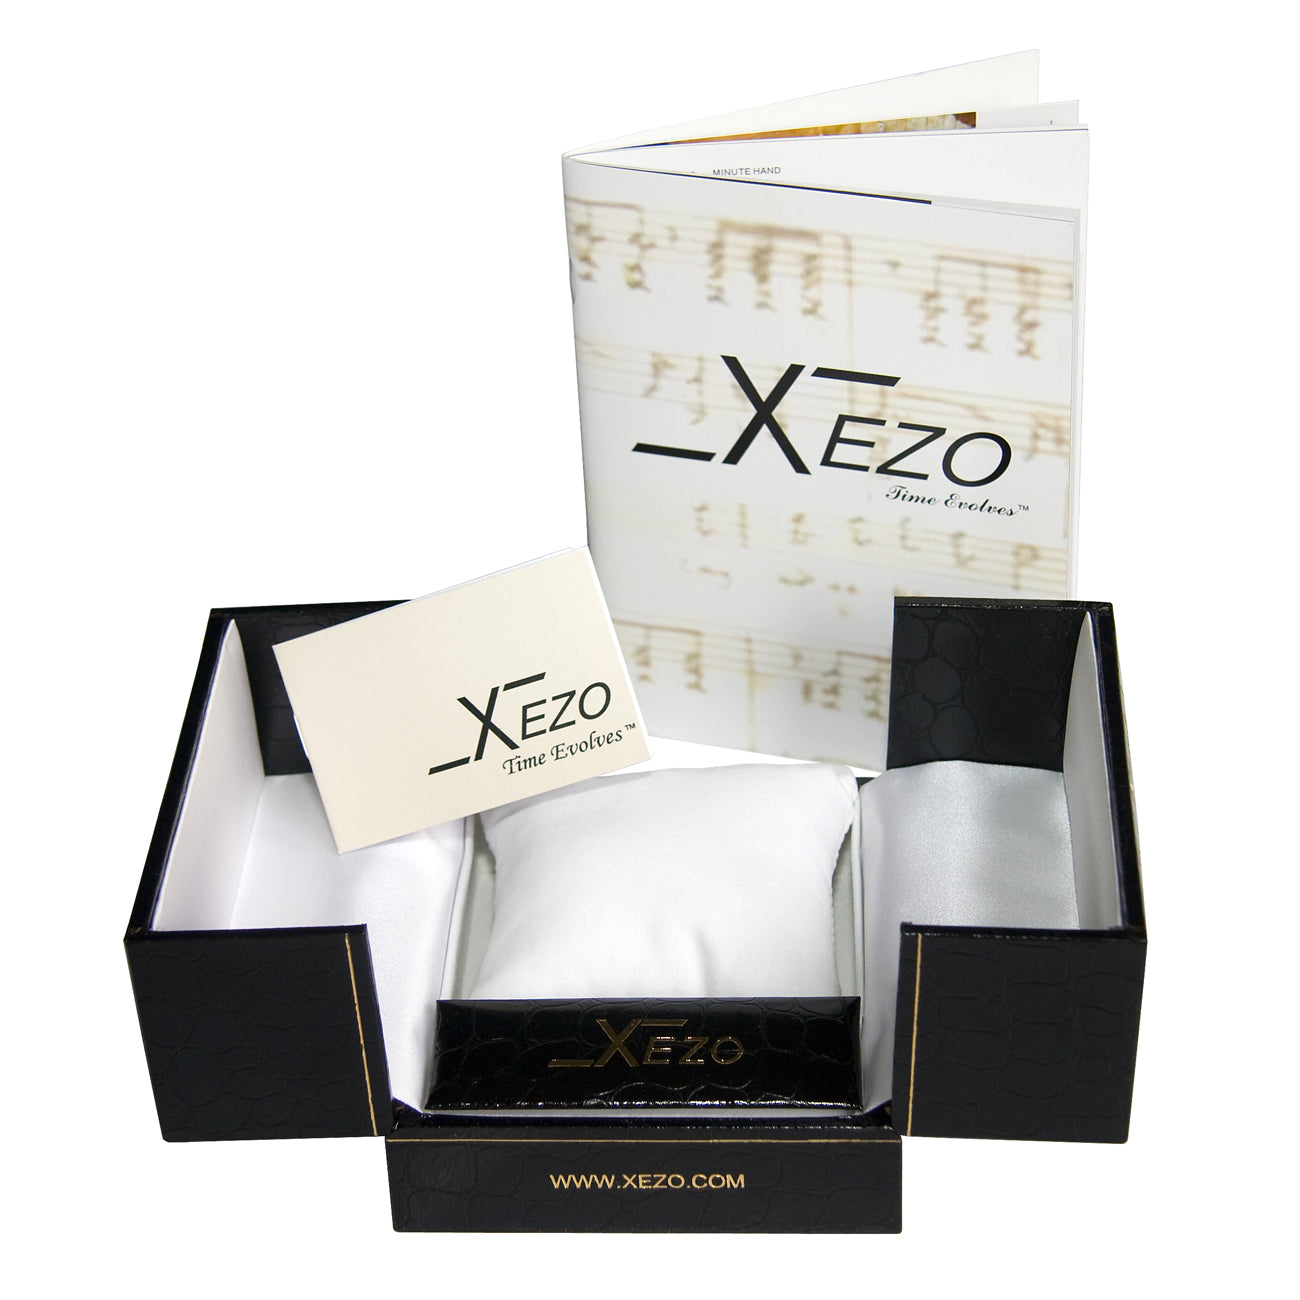 Xezo - Black gift box, certificate, and manual of the Architect 2001 UG Tank watch